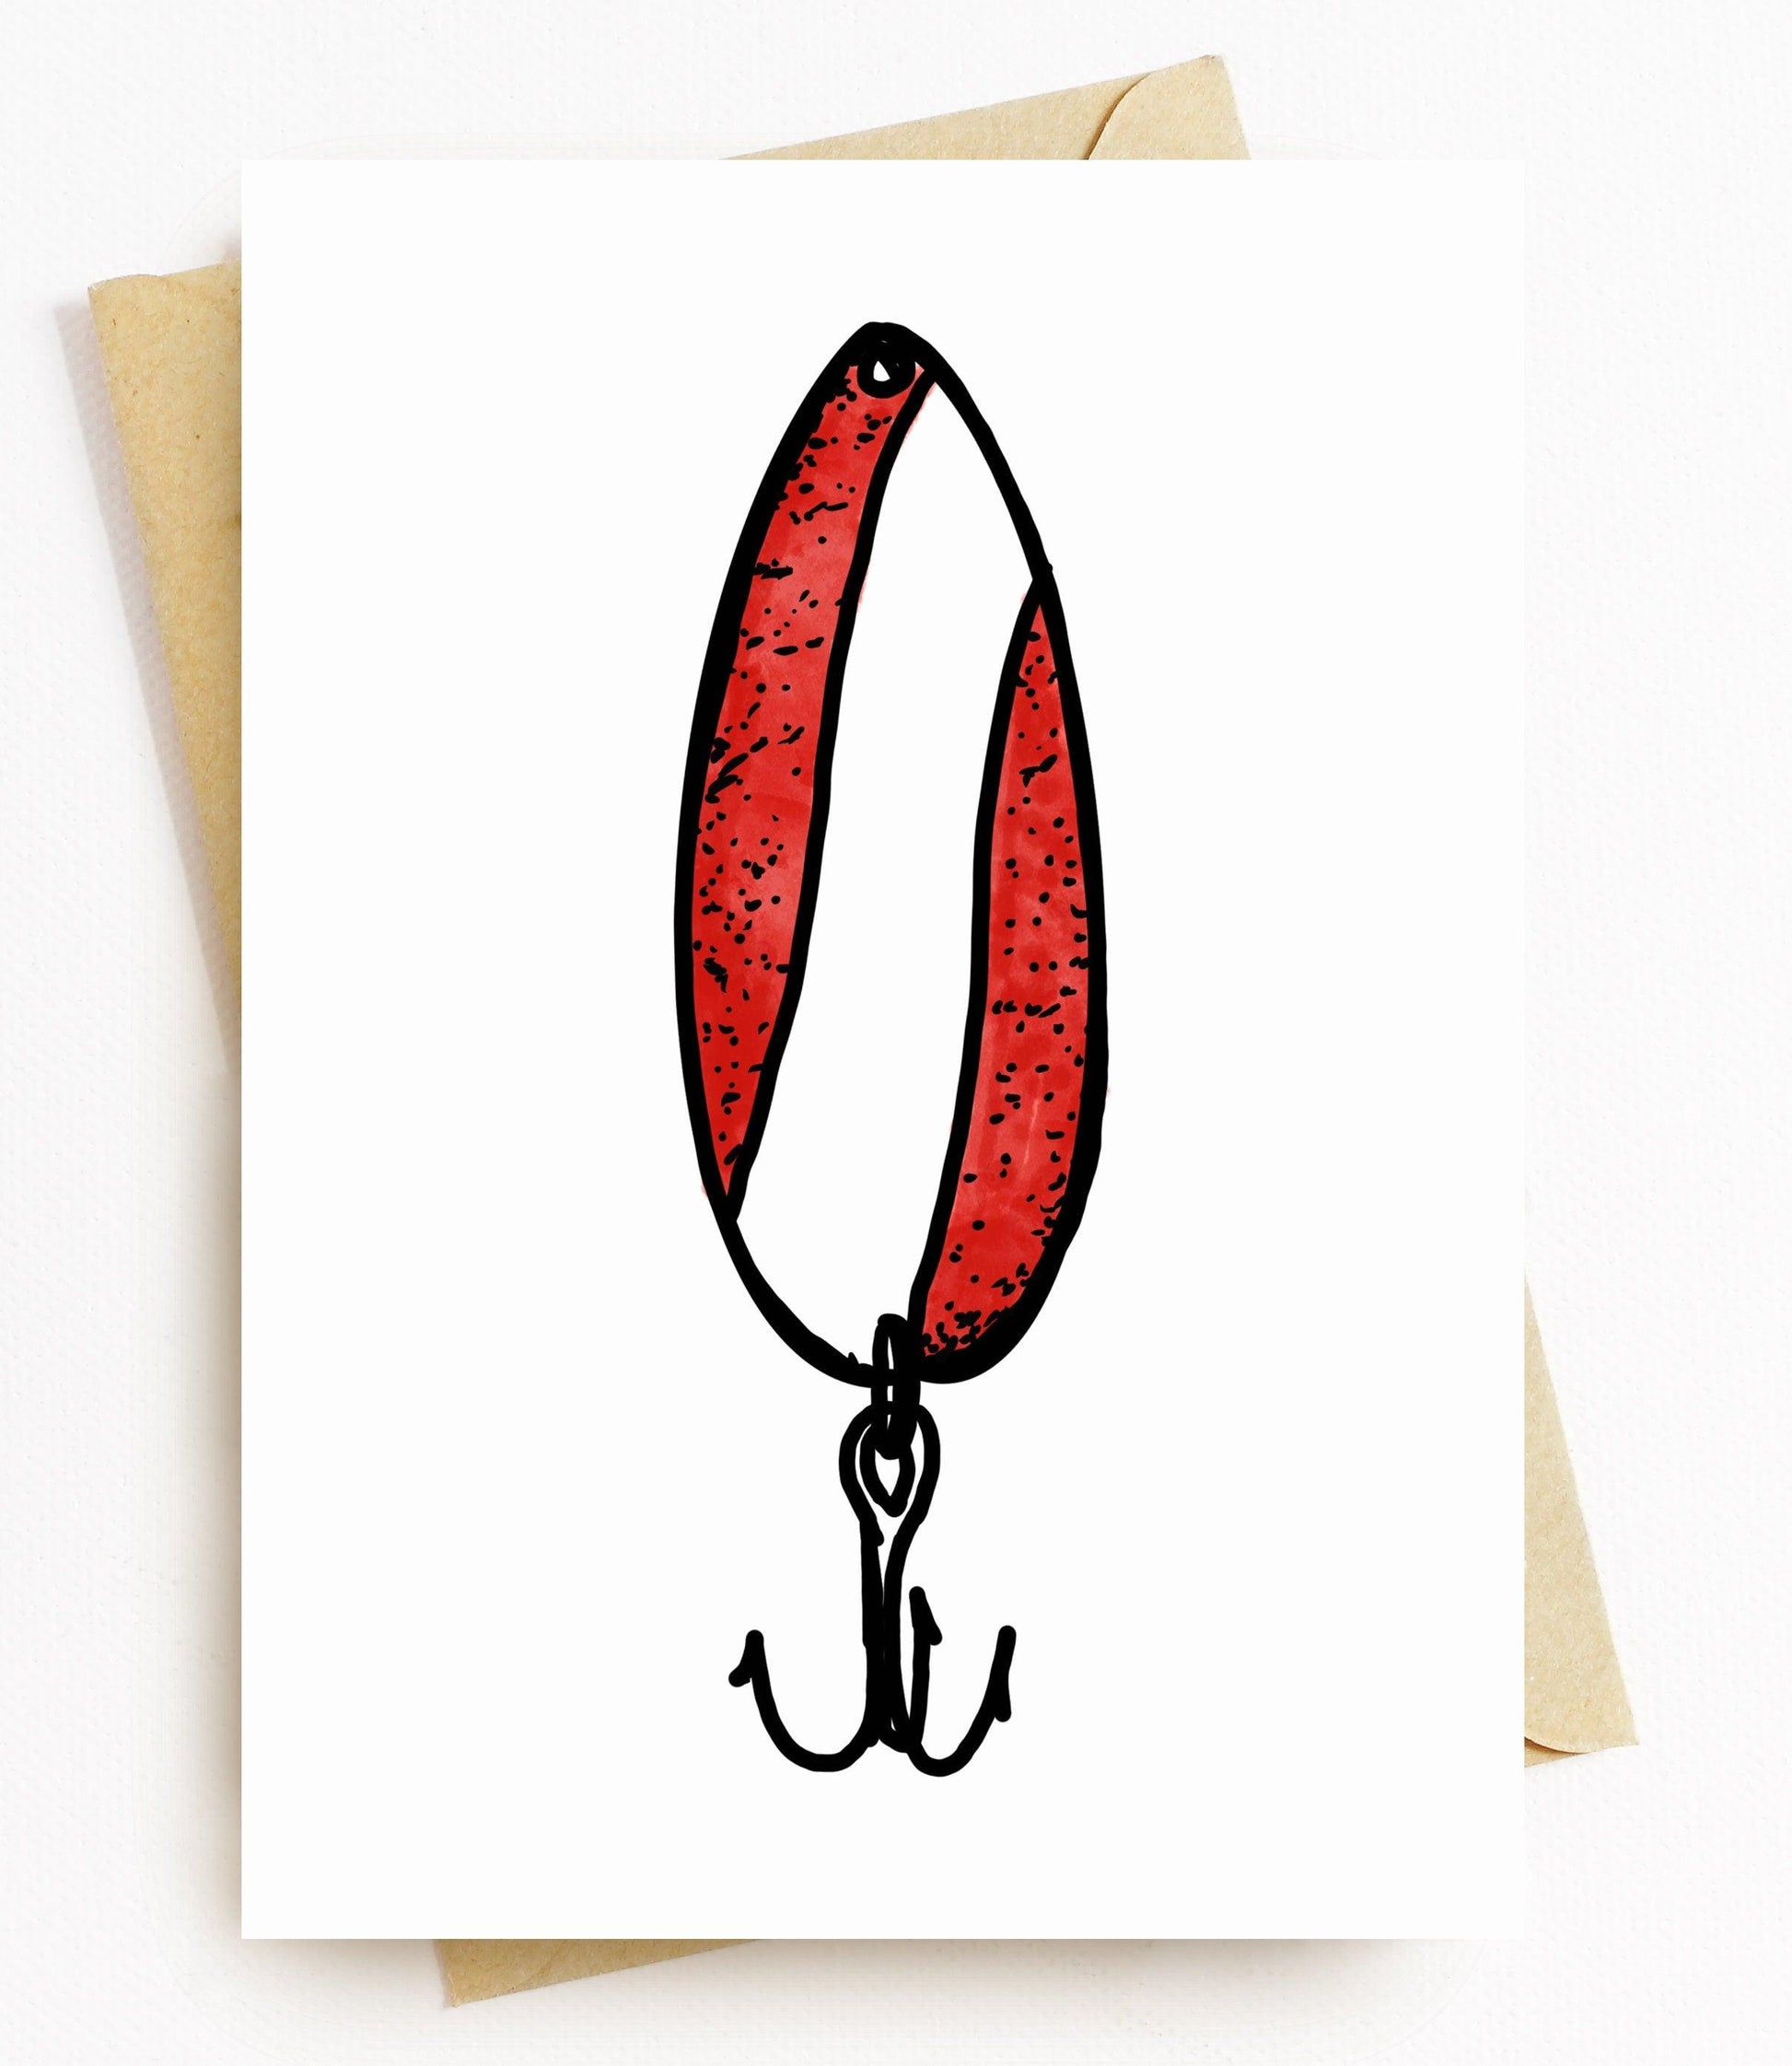 BellavanceInk: Pen & Ink/Watercolor Old Fashioned Classic Fishing Lure